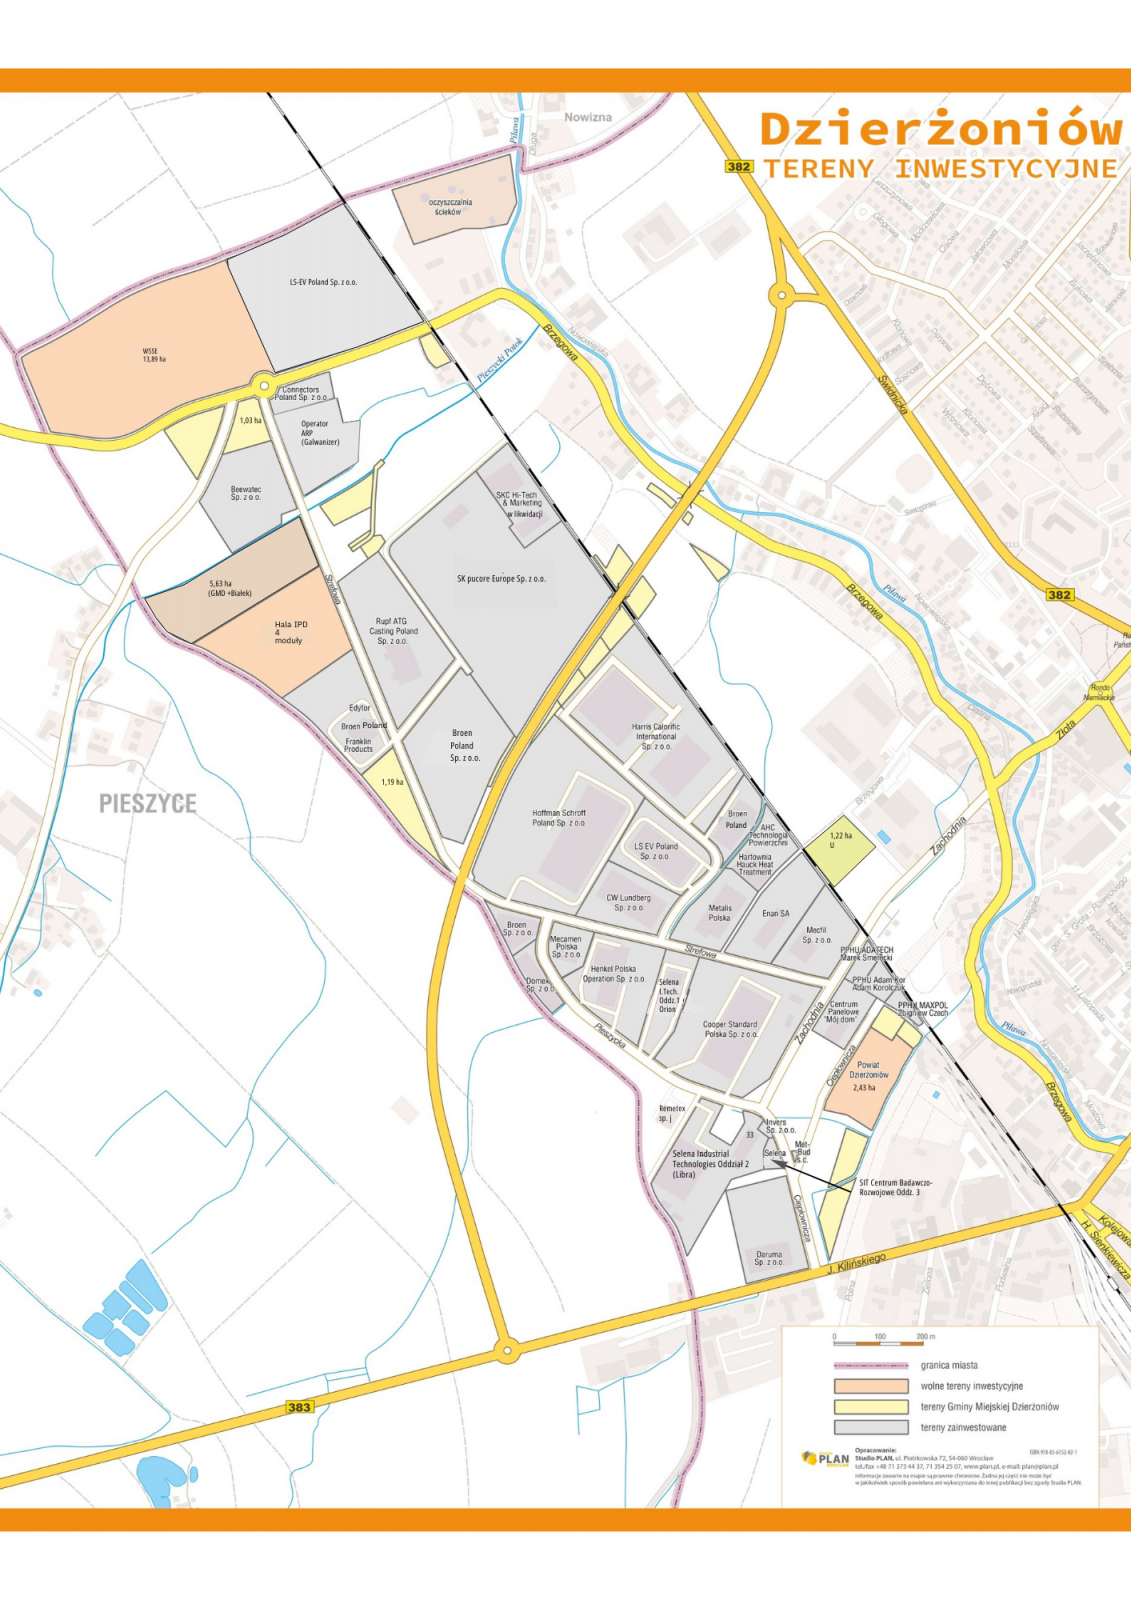 Map of the Wałbrzych Special Economic Zone - Dzierżoniów Subzone with marked investment areas. Gray color - invested areas, salmon color - areas to be invested, yellow color - areas owned by the Dzierżoniów Municipality, pink line marks the city border. Map of the Wałbrzych Special Economic Zone - Dzierżoniów Subzone.